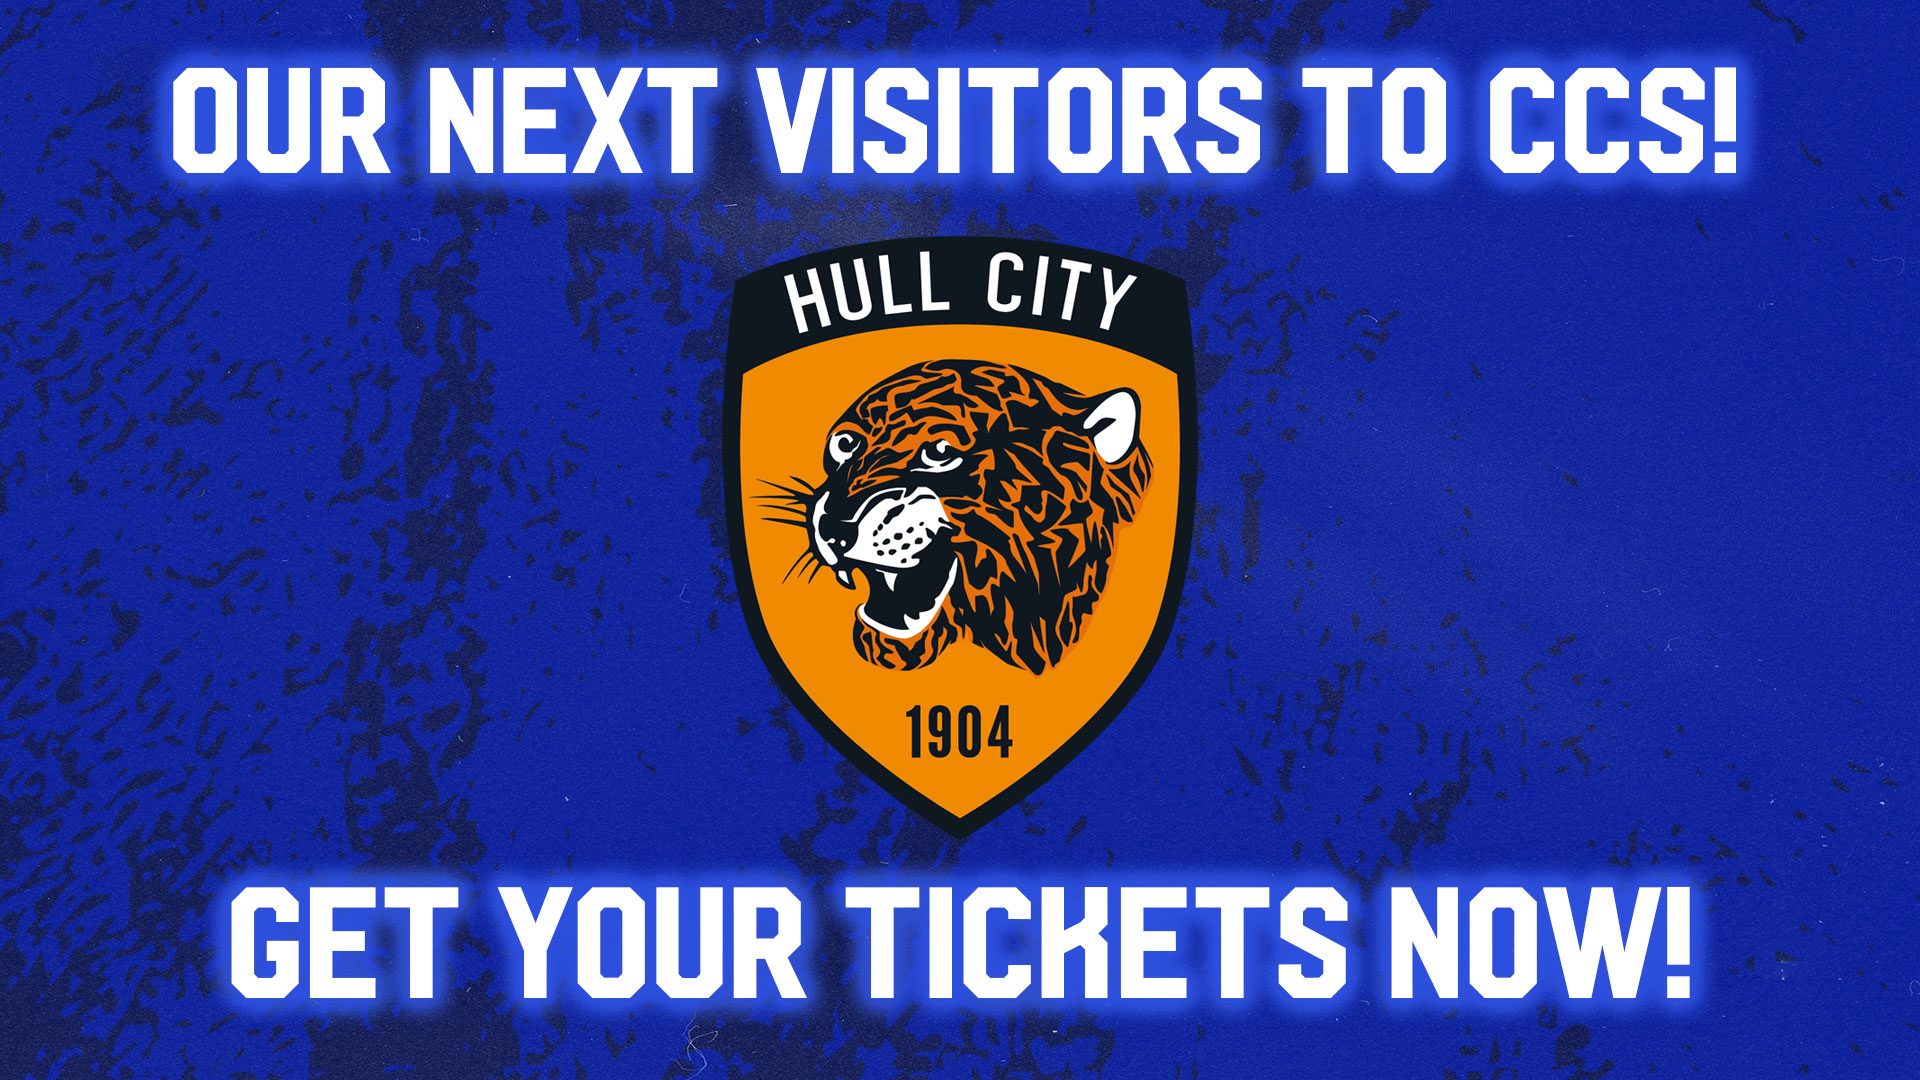 Hull City are the next visitors to CCS...